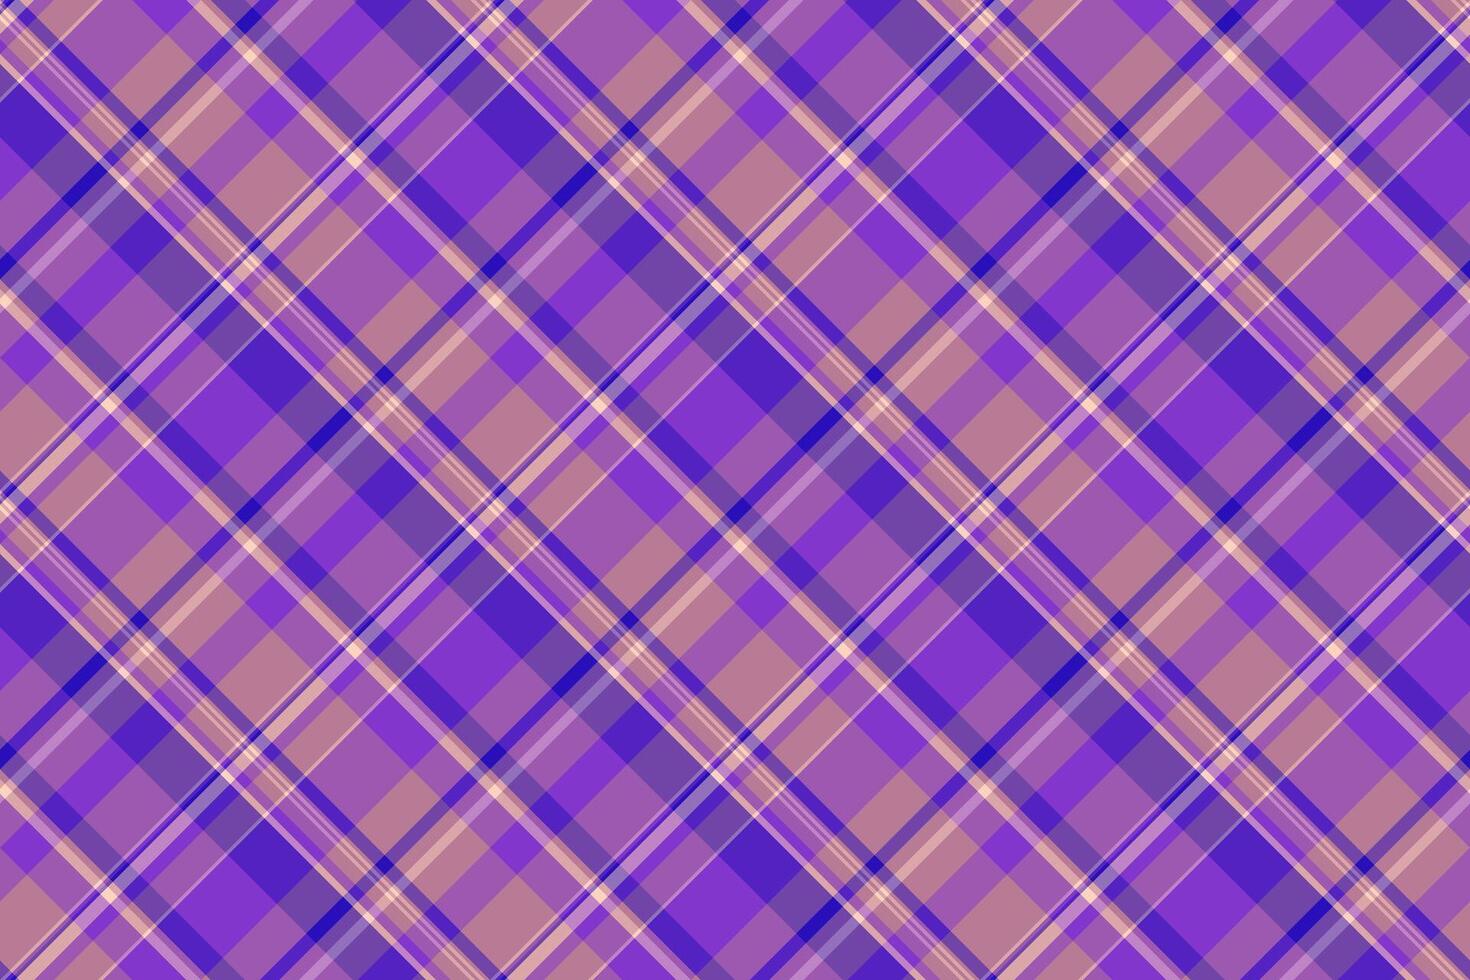 Copy space pattern background check, wide texture fabric tartan. Merry christmas seamless textile vector plaid in purple and violet colors.